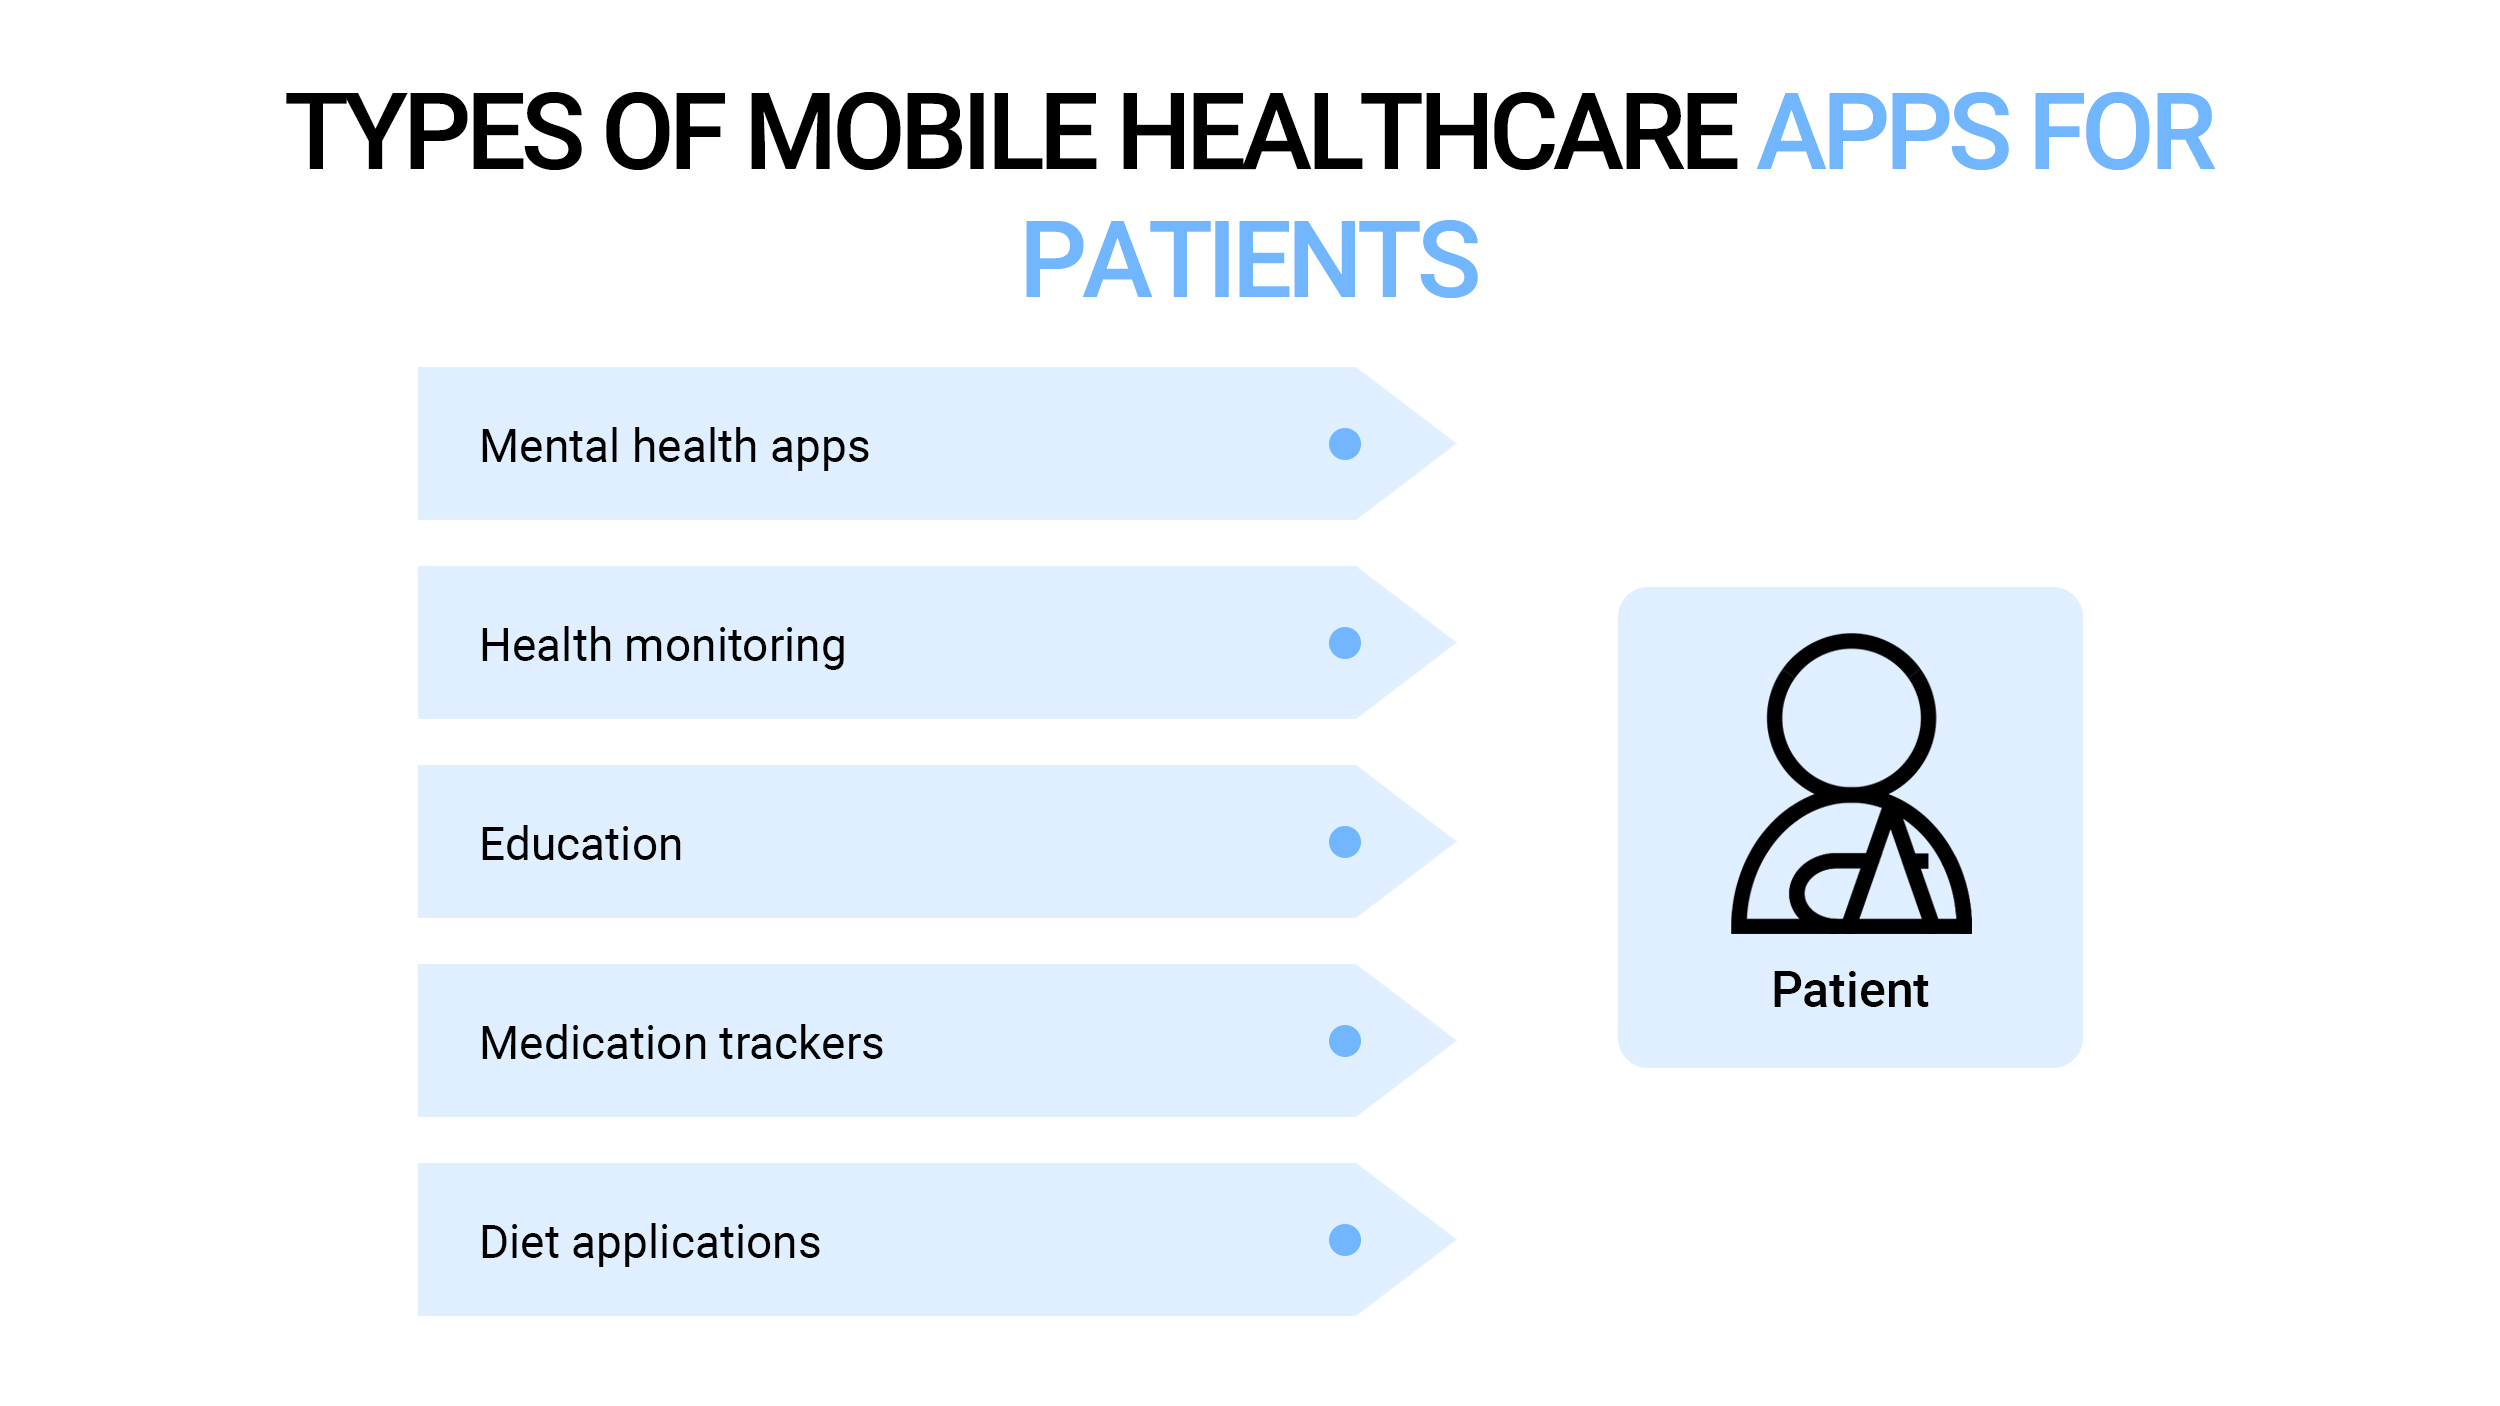 Types of mobile healthcare apps for patients